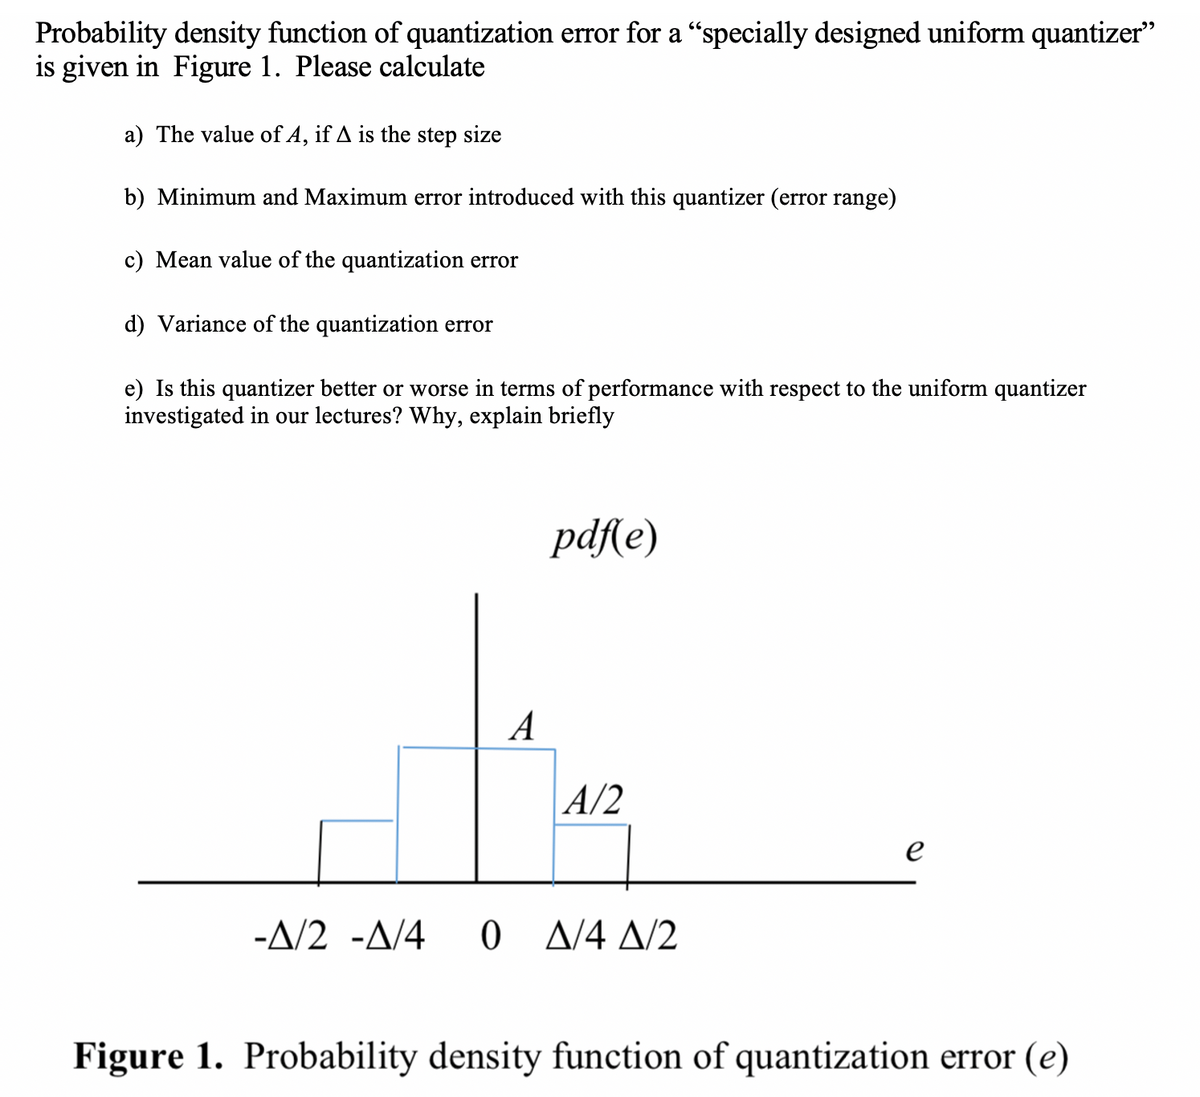 Probability density function of quantization error for a “specially designed uniform quantizer"
is given in Figure 1. Please calculate
a) The value of A, if A is the step size
b) Minimum and Maximum error introduced with this quantizer (error range)
c) Mean value of the quantization error
d) Variance of the quantization error
e) Is this quantizer better or worse in terms of performance with respect to the uniform quantizer
investigated in our lectures? Why, explain briefly
pdfle)
A
A/2
e
-A/2 -A/4
0 /4 A/2
Figure 1. Probability density function of quantization error (e)
